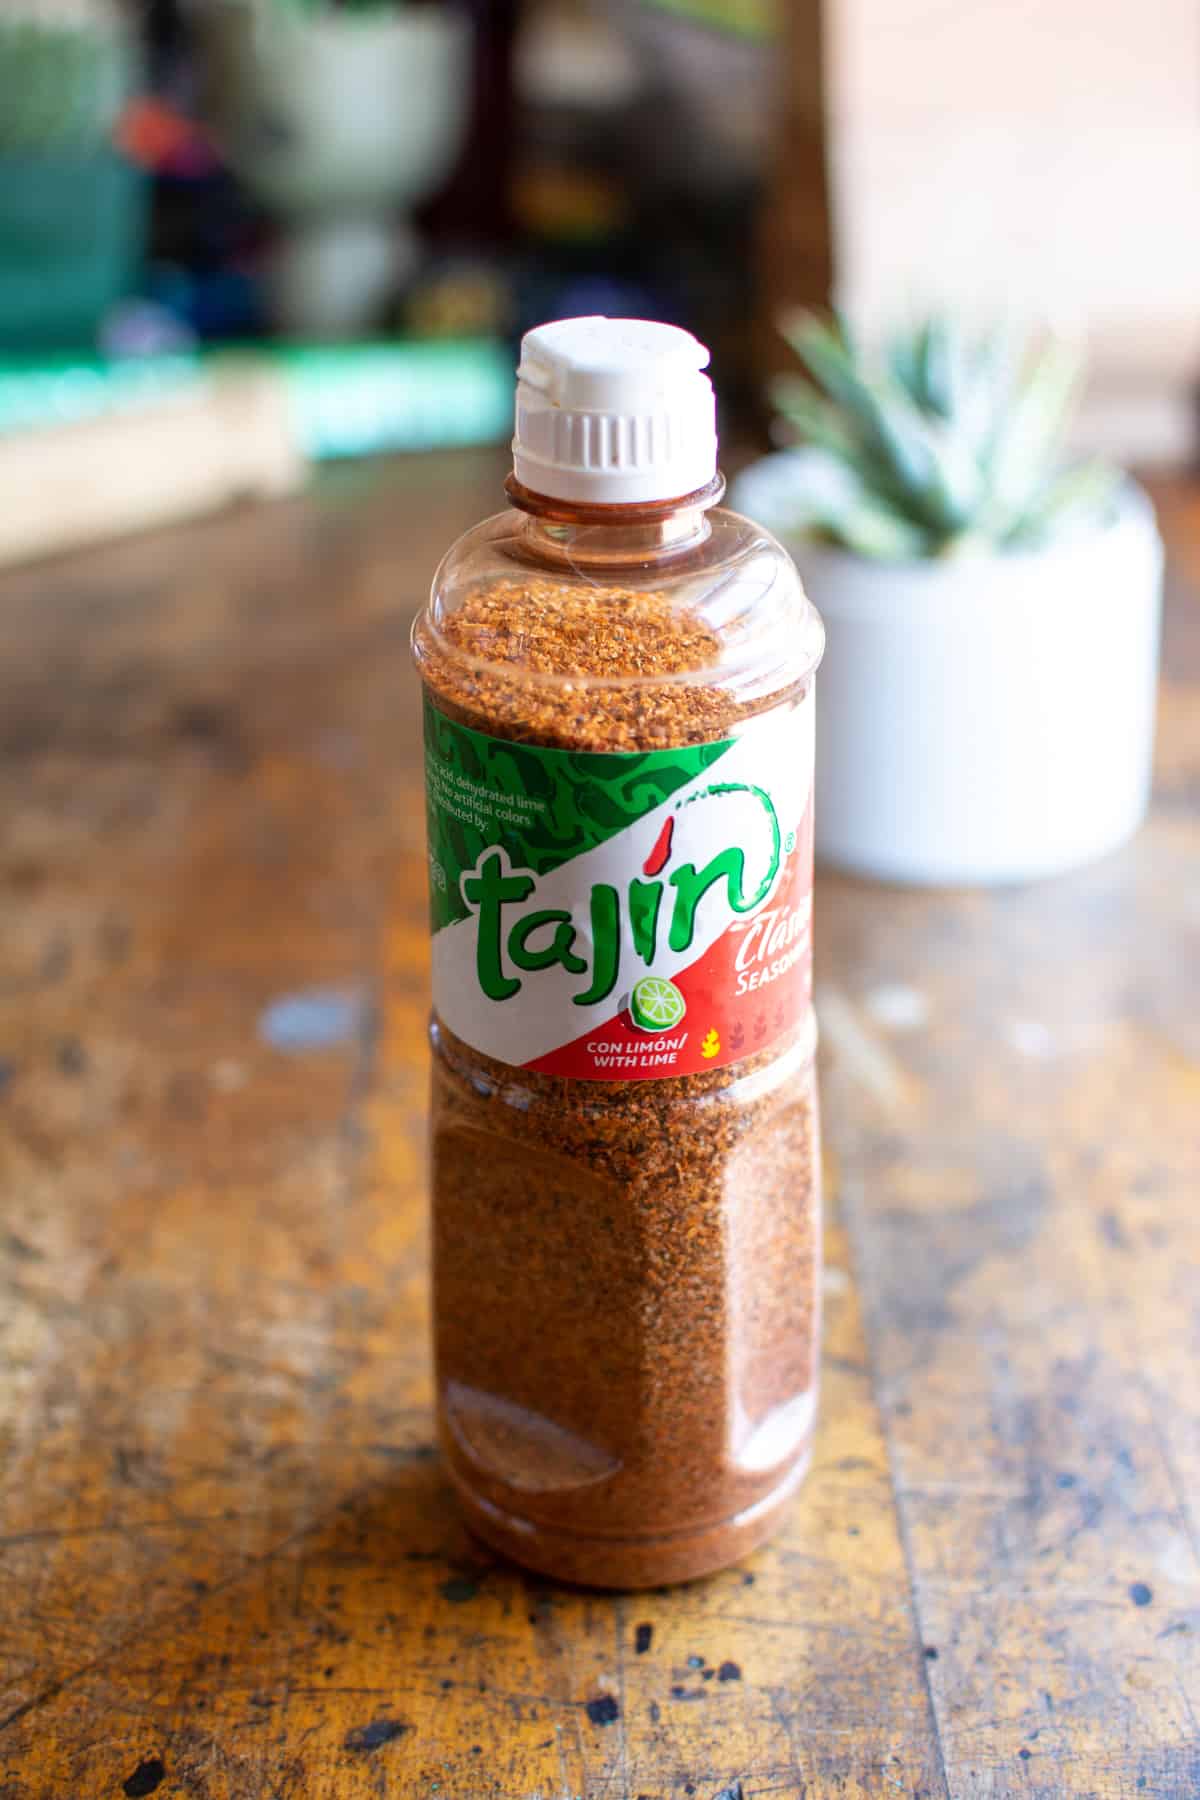 When it comes to seasoning mix, without a doubt, the king is Tajín. This chile-lime seasoning salt elevates everything it touches, from juicy watermelon to the rim of your margarita glass. But there's a lot more Tajin can be used for. Here's 11 excellent ideas. #tajín #holajalapeno #seasoningsalt #spicy